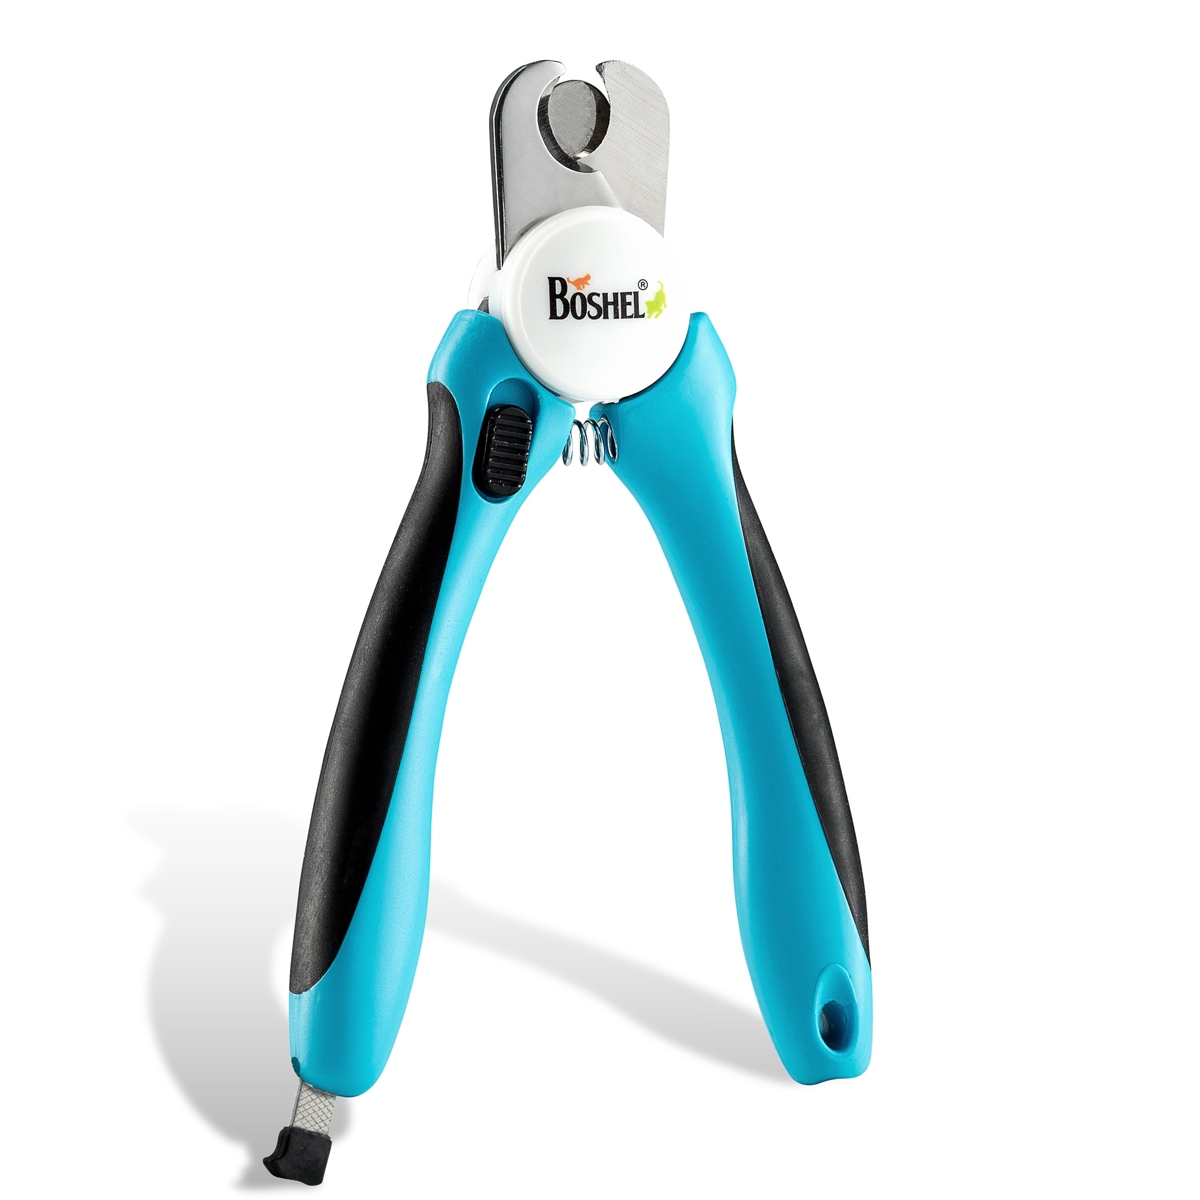 Dog Nail Clippers - Large - Blue